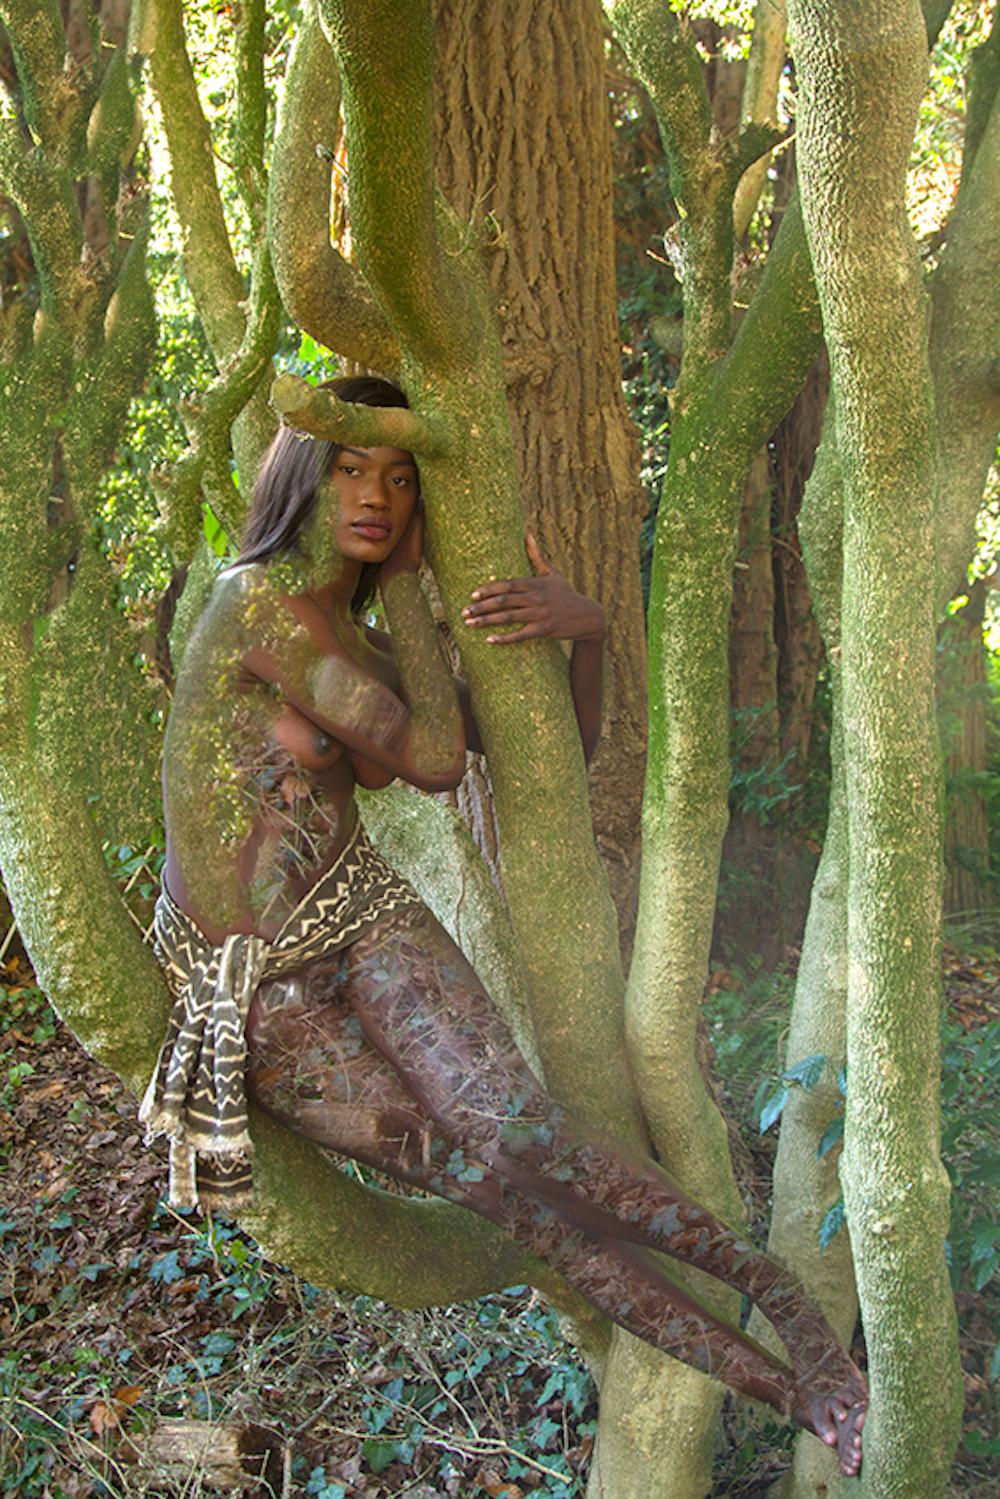 Uwe Ommer Color Photograph - Women and Trees III. Limited edition Color photograph